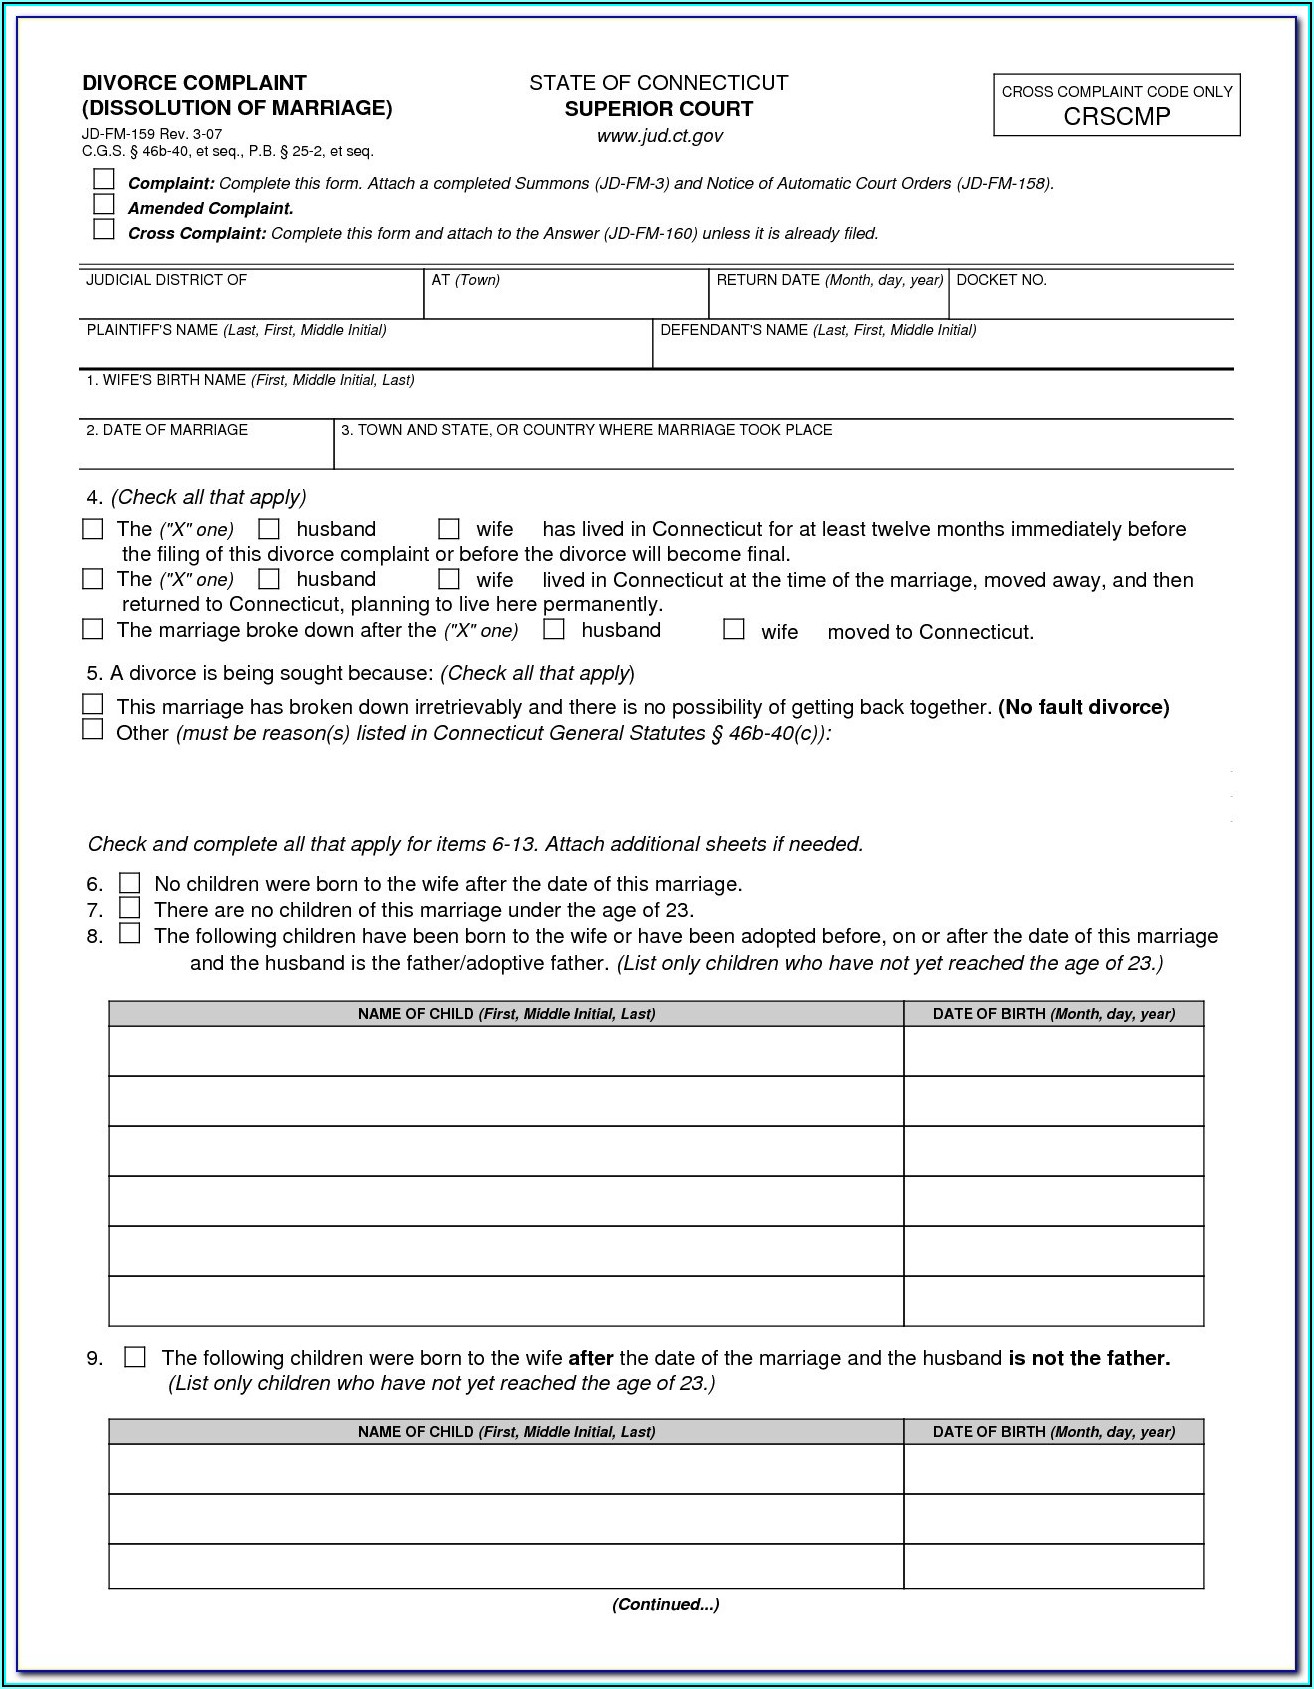 washington-state-uncontested-divorce-forms-form-resume-examples